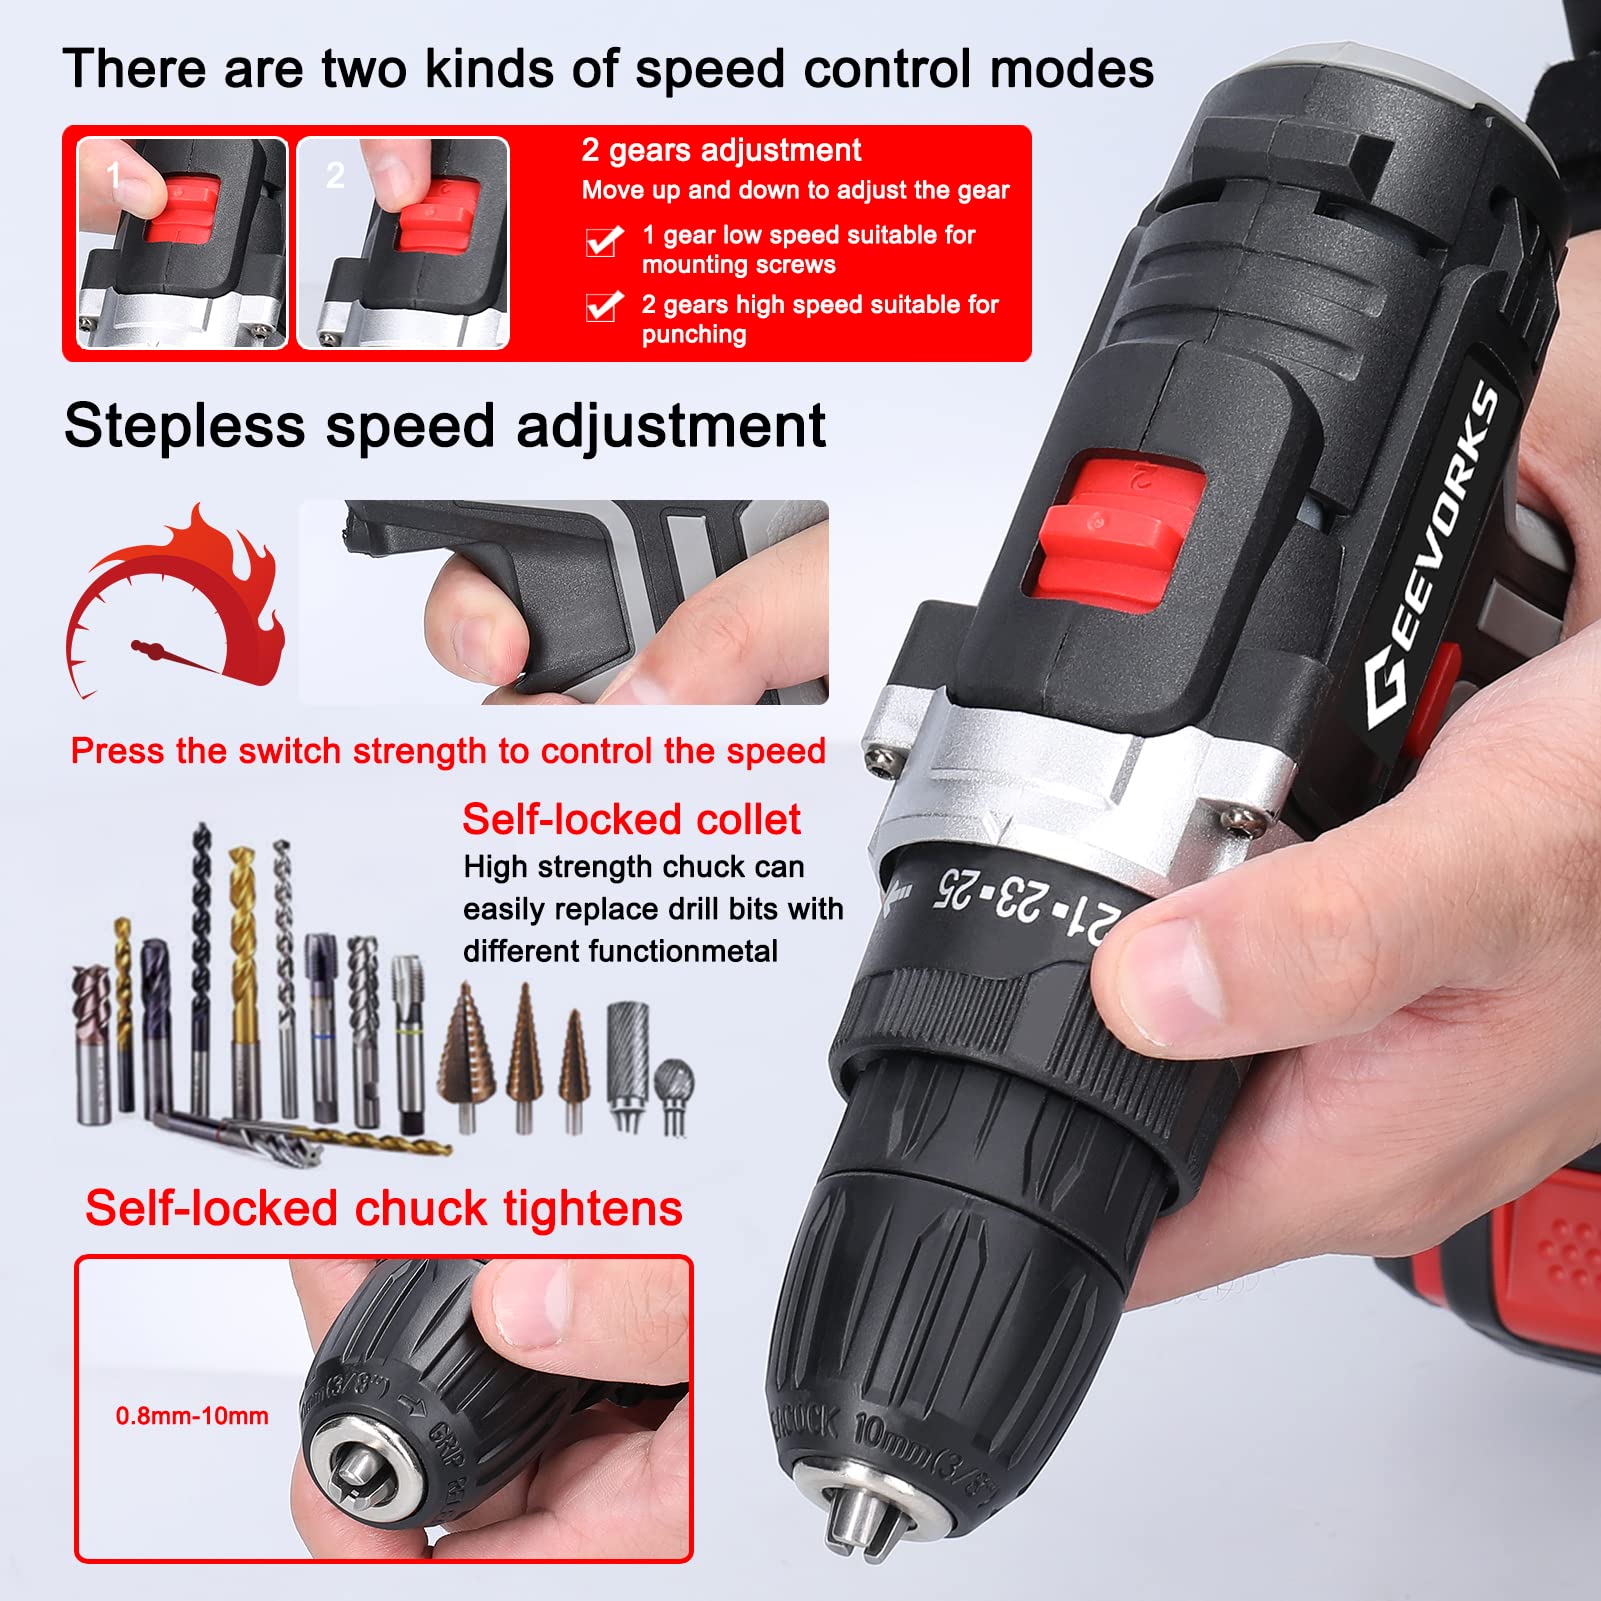 mewmewcat Electric Drill 21V Multi-functional Electric Impact Cordless Drill High Power Lithium Battery Rechargeable Hand Drill Home DIY Power Tool